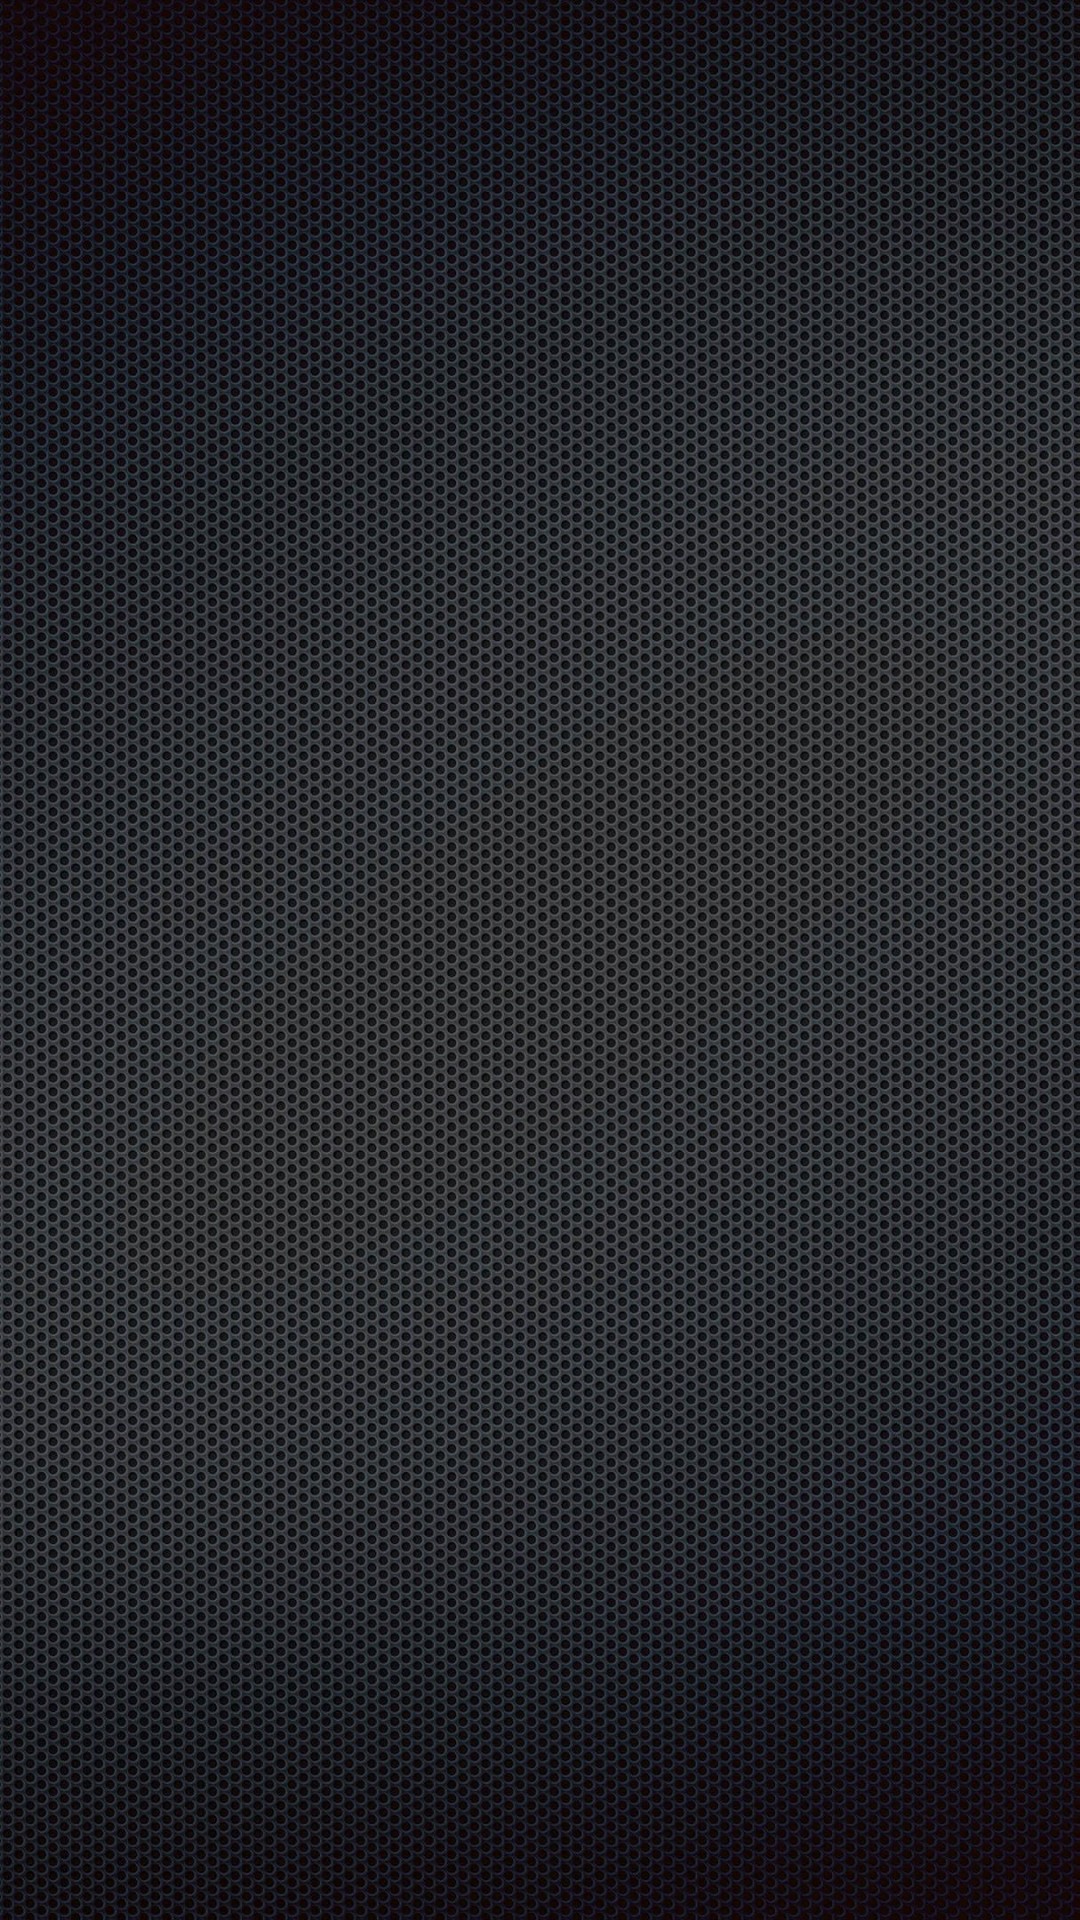 Black Grill Texture Wallpaper for SONY Xperia Z2